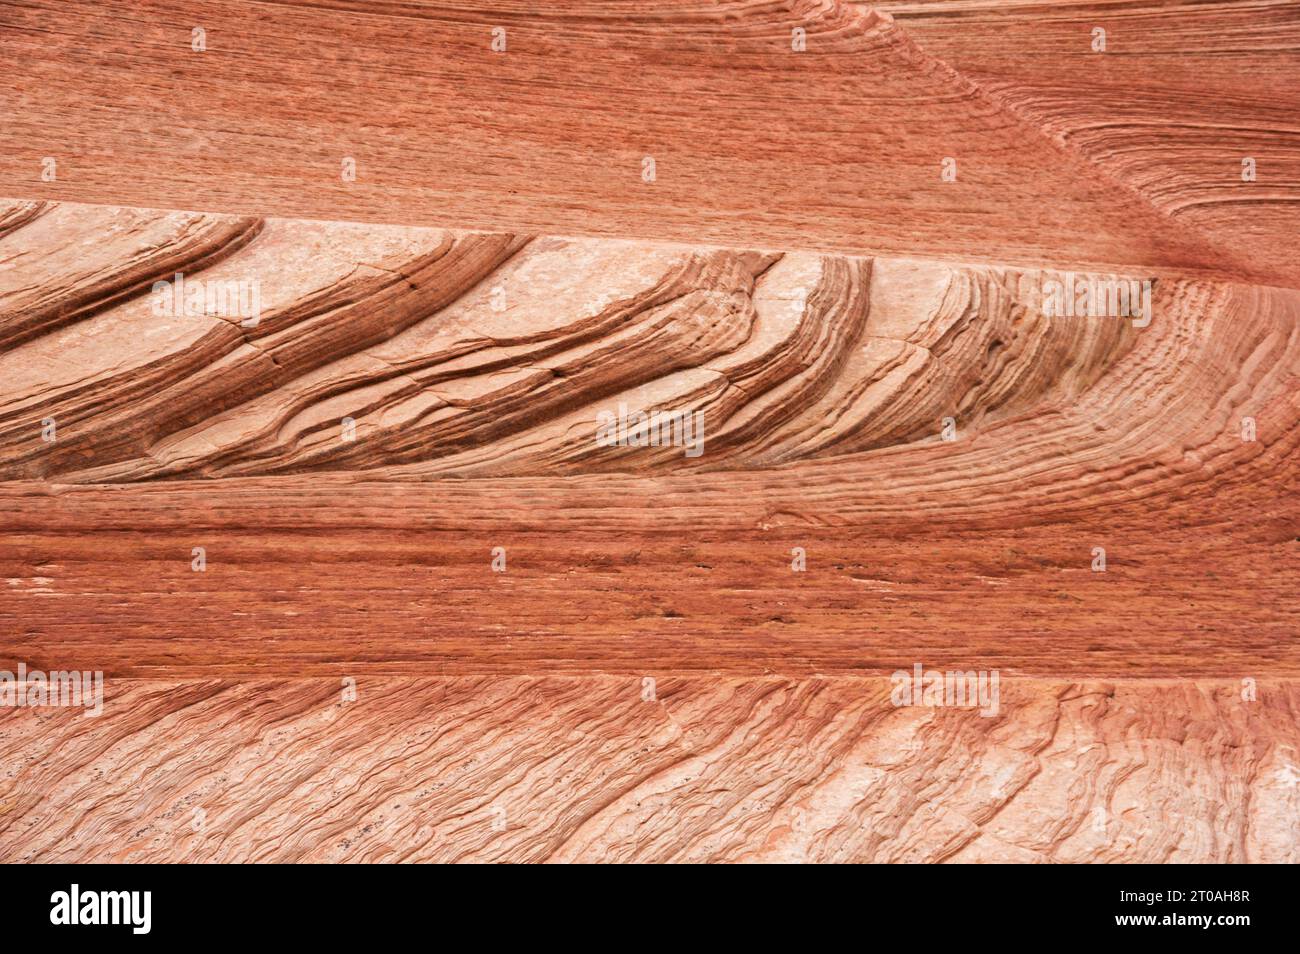 cross bedded red sandstone in Zion National Park Stock Photo